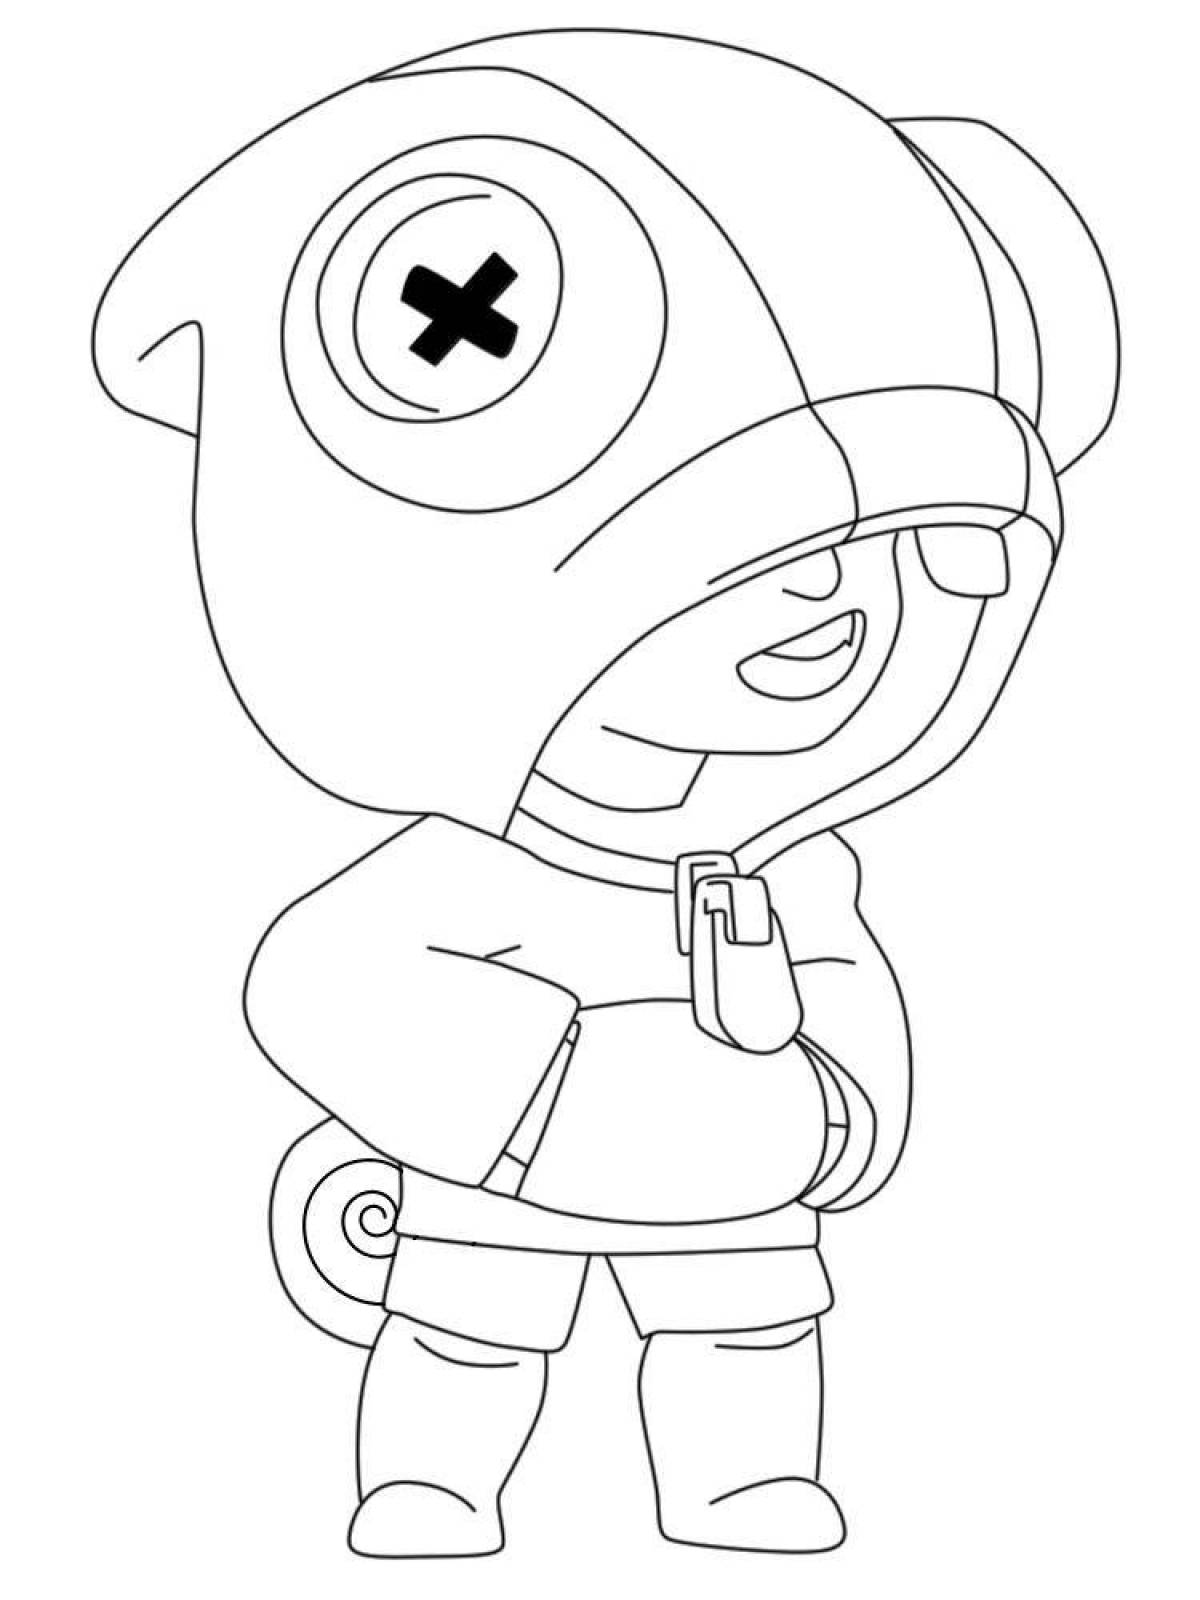 Amazing bravo stars coloring pages for kids